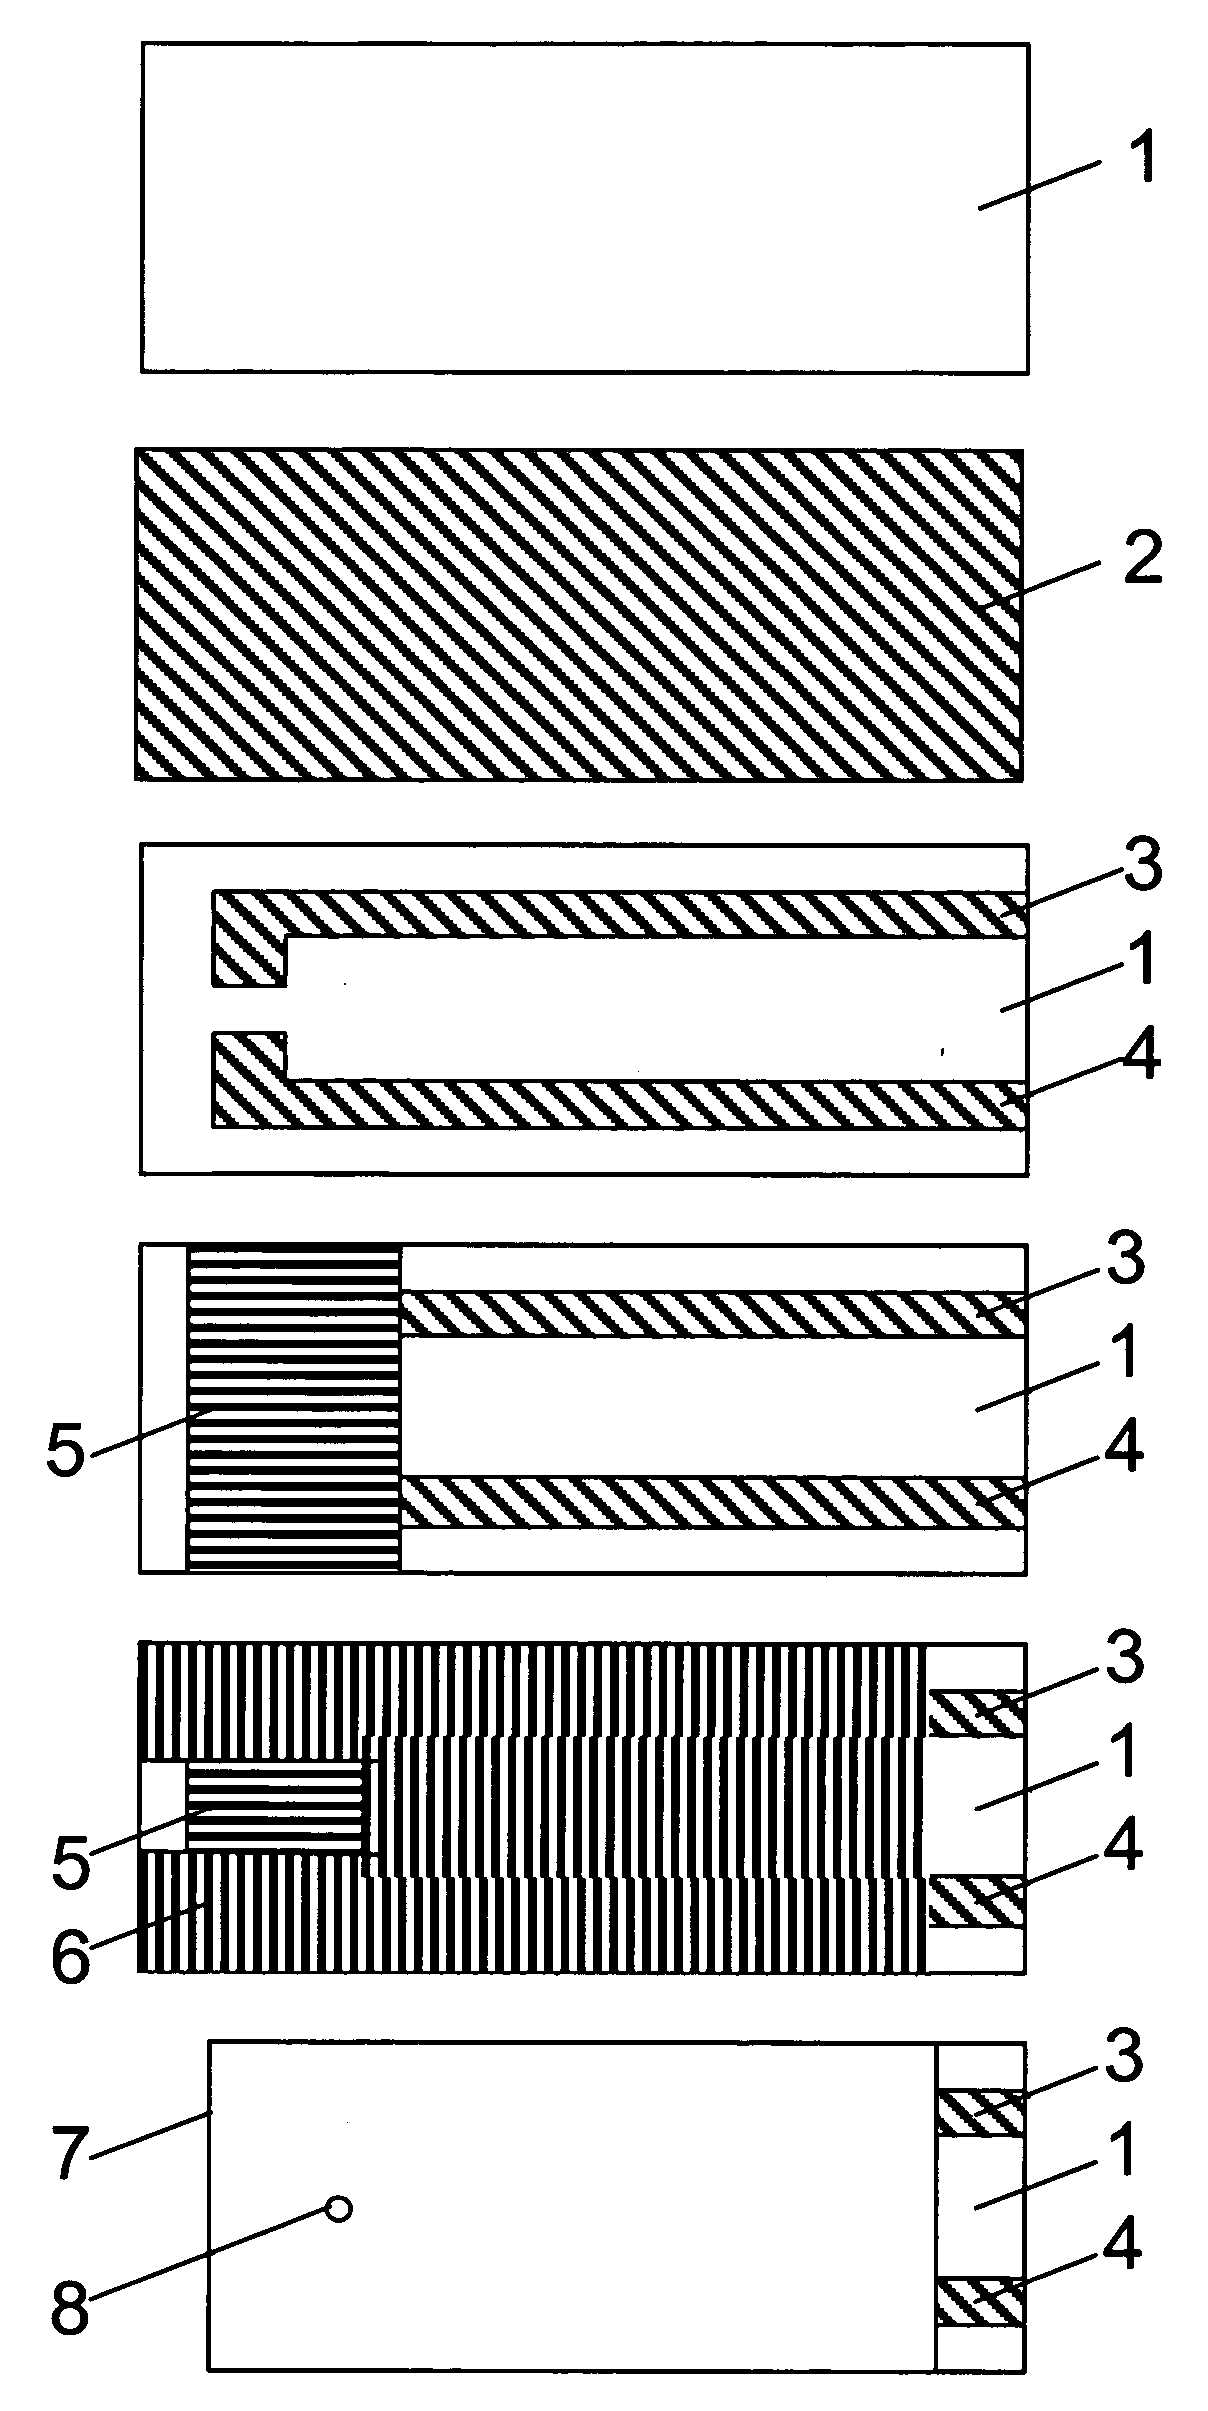 Method and reagent for producing narrow, homogenous reagent stripes